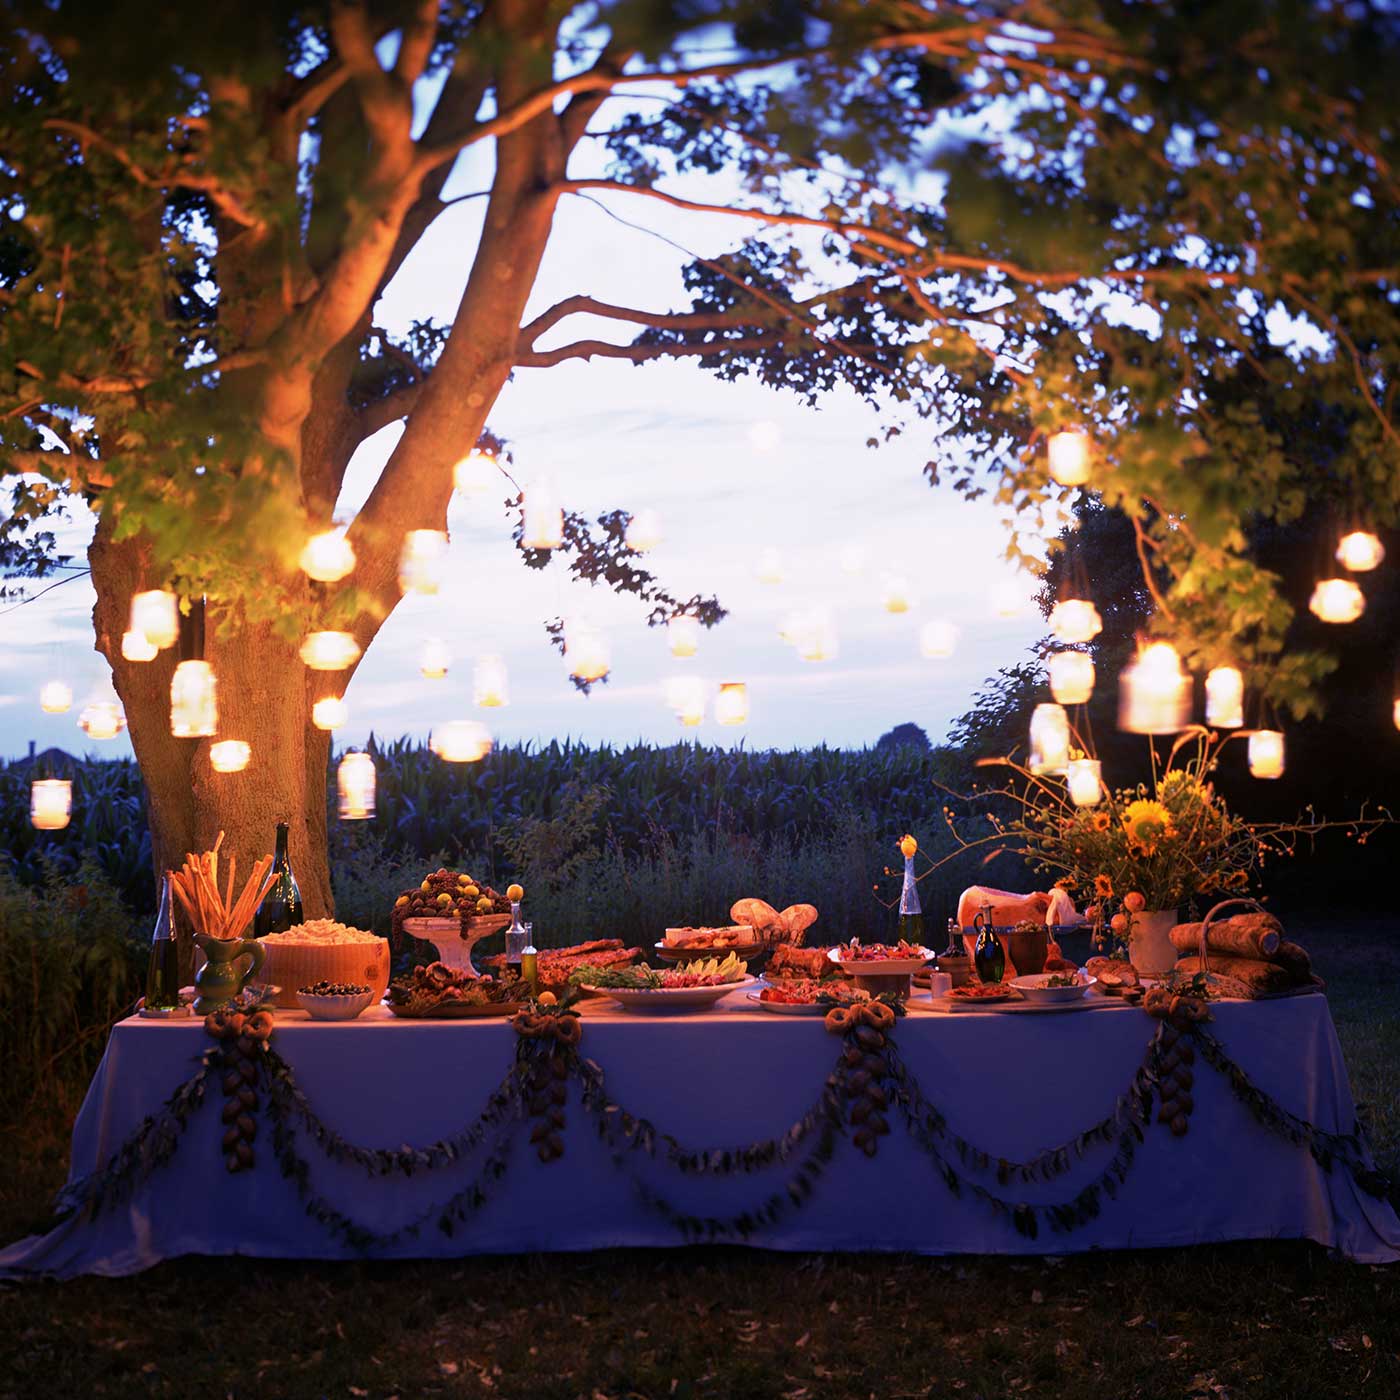 11 Wedding Splurges That Could Make Or Break Your Big Day
